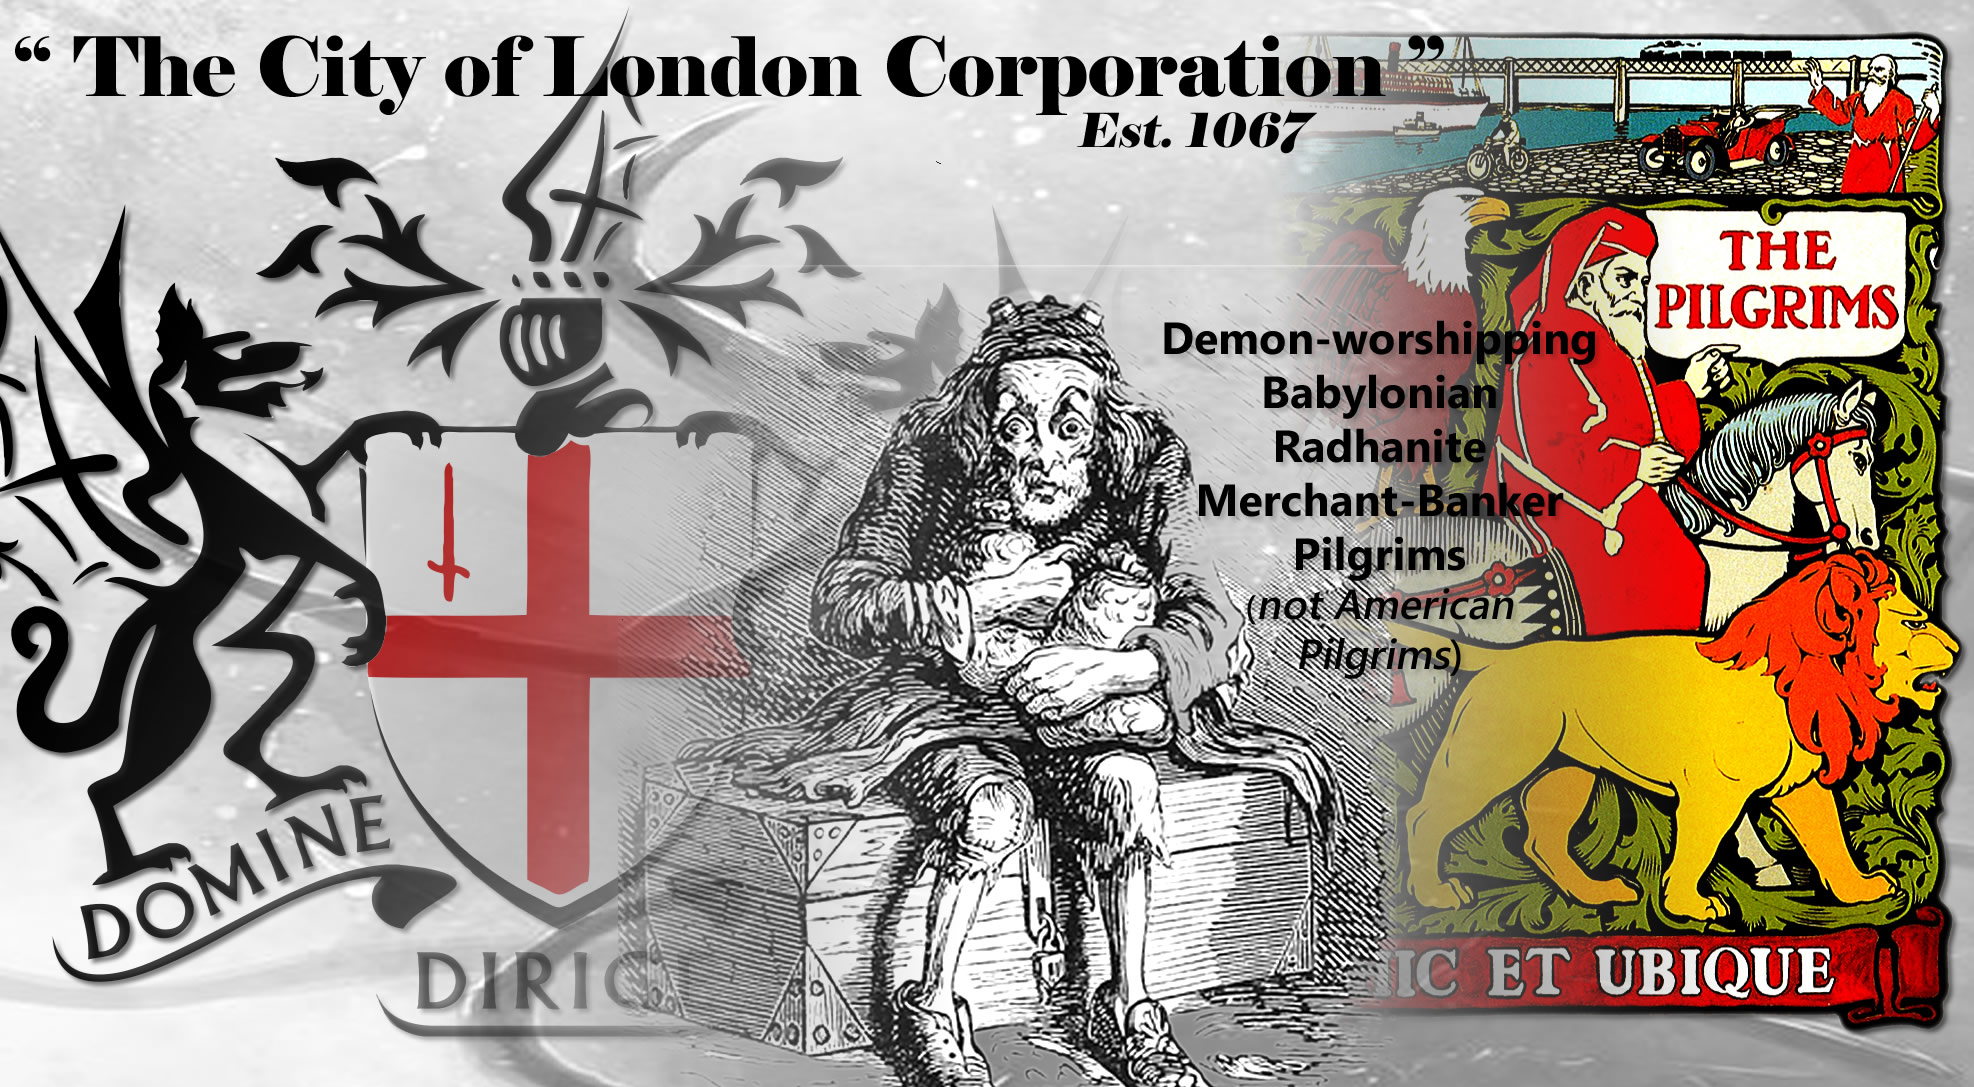 The City of London is controlled by the Pilgrims Society who carry on the pagan control of the Rādhānite merchant-bankers of Babylon. “The City of London Co​rporation” was chartered in 1067 after the coronation of William I, William the Conqueror, on Dec. 25, 1066 AD at Westminster Abbey.